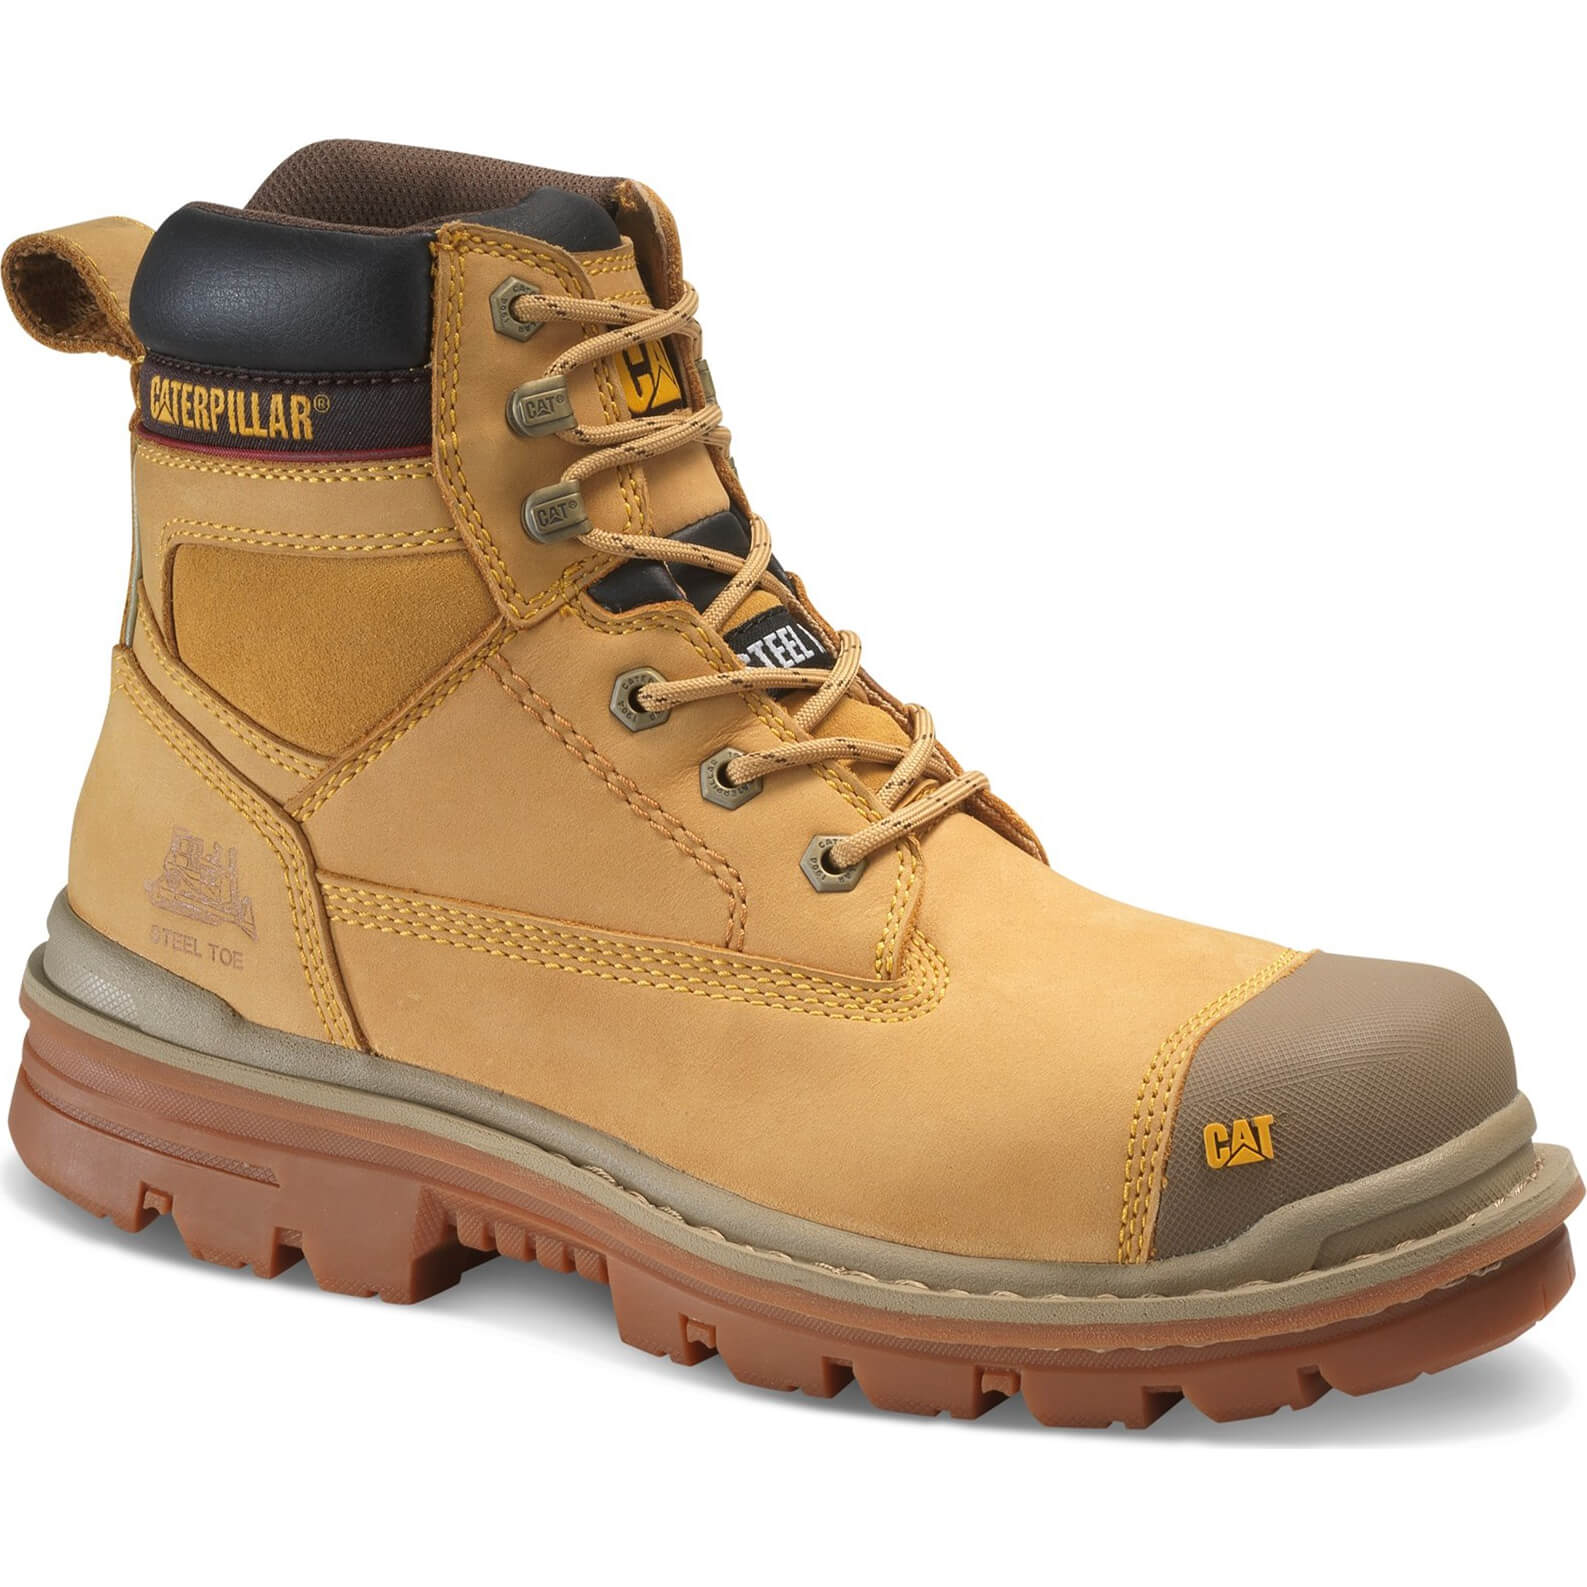 Image of Caterpillar Mens Gravel Safety Boots Honey Size 11